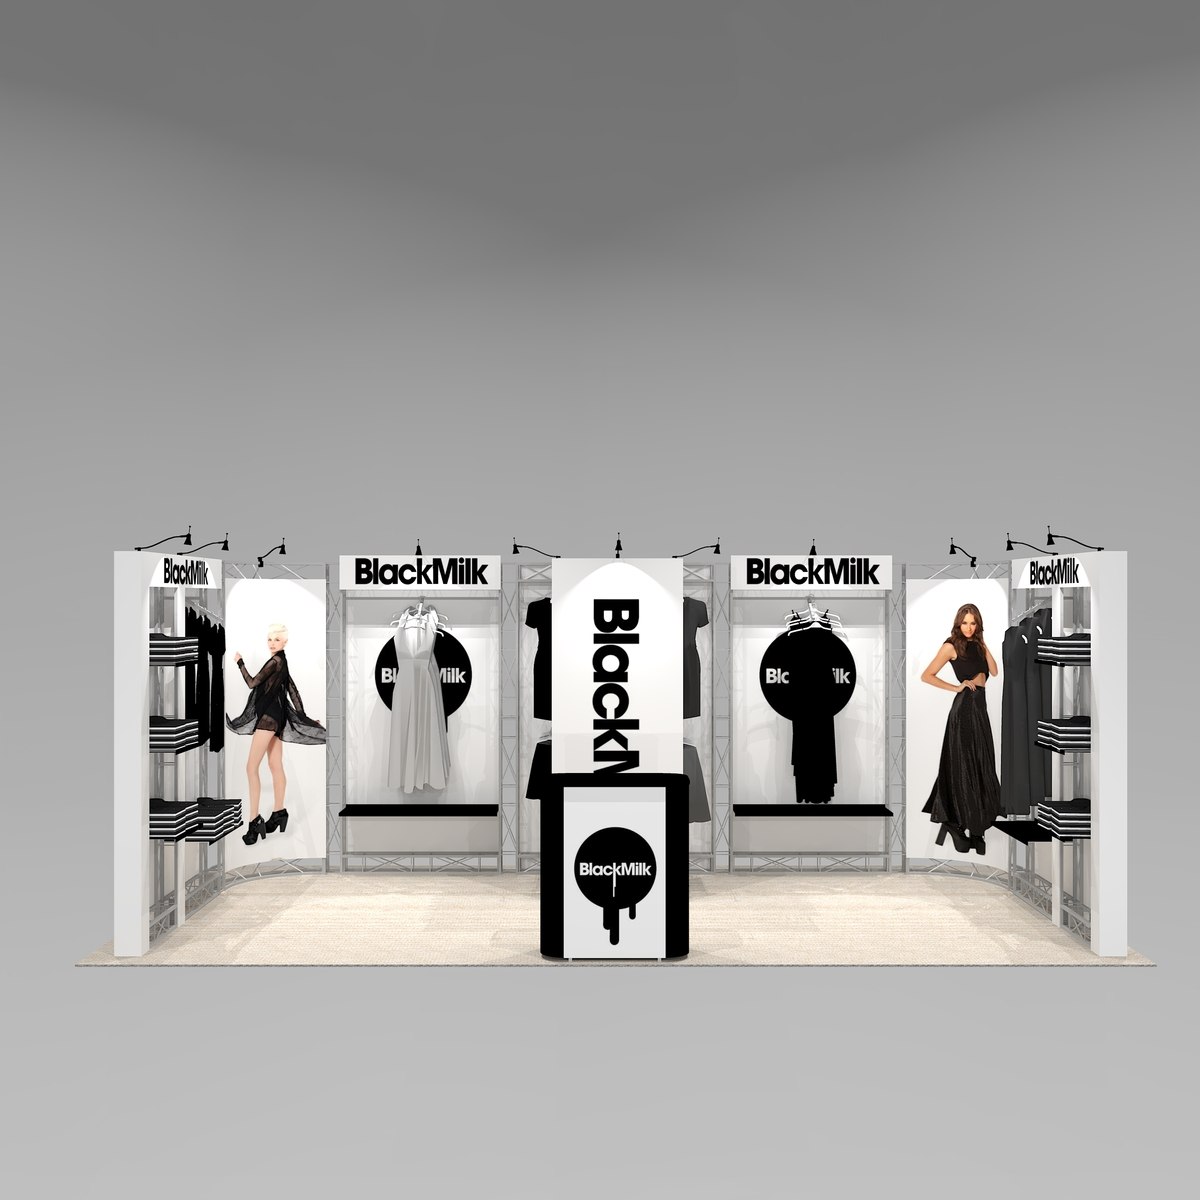 Clothing and merchandise trade show exhibit design SAL1020 Graphic Package C